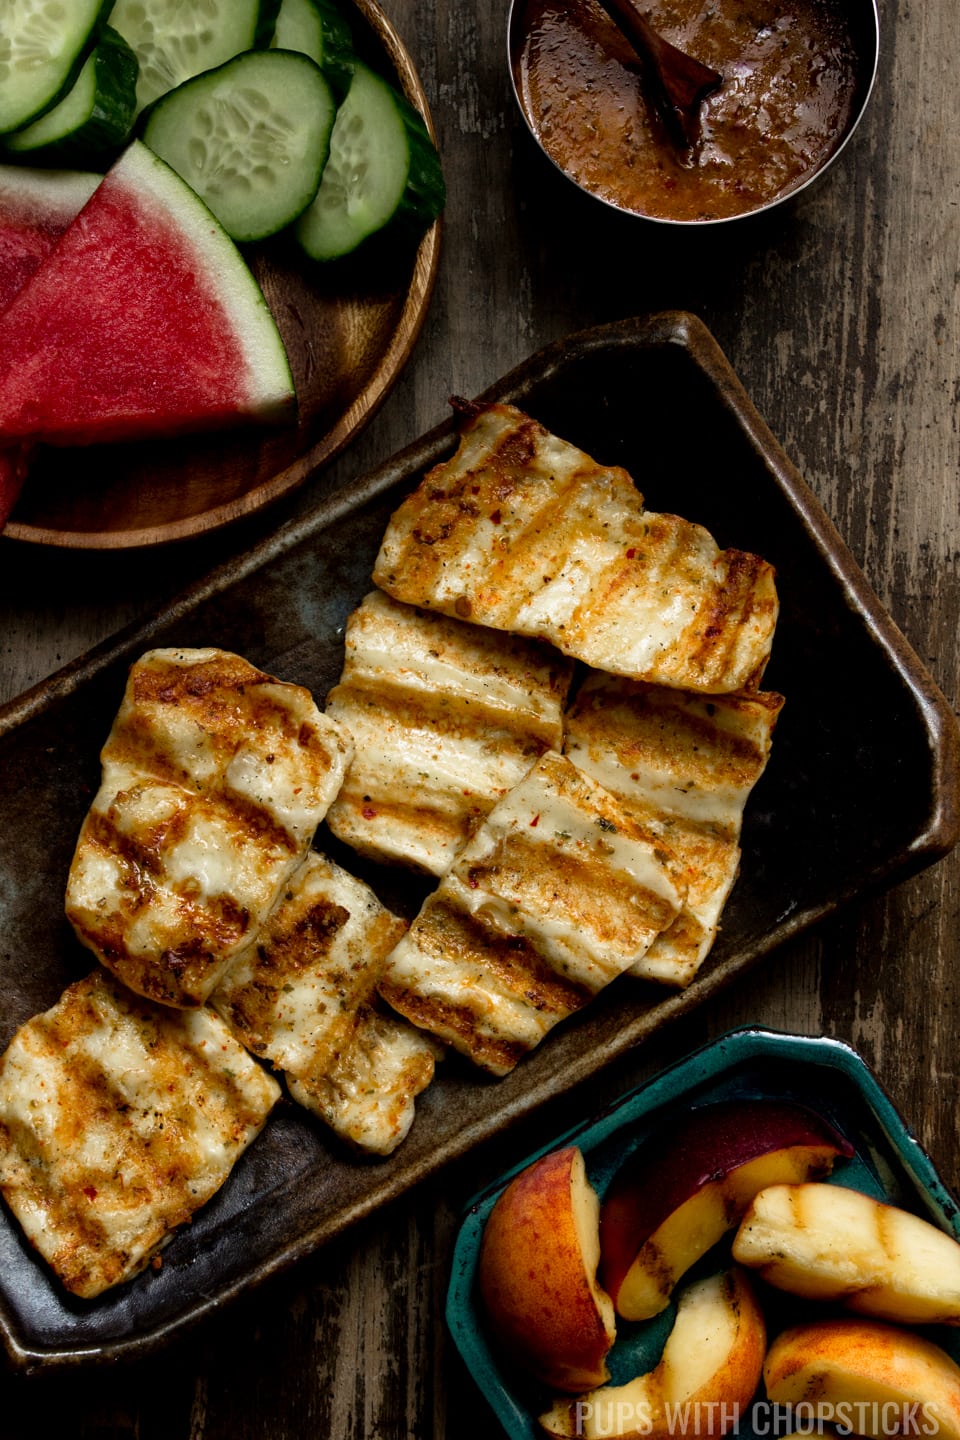 Grilled Halloumi Cheese Pups With Chopsticks